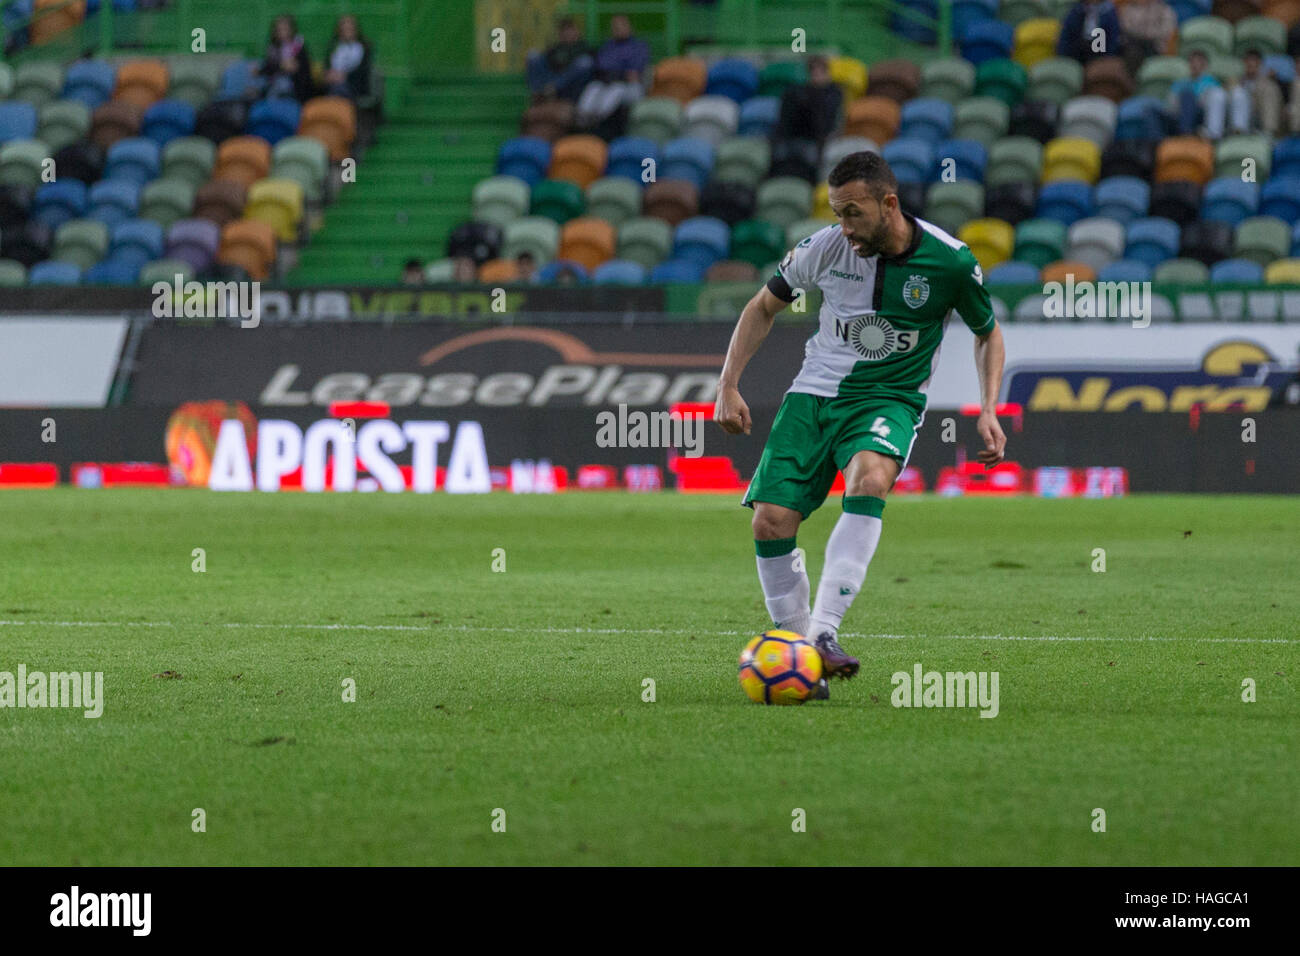 Lisbon, Portugal. 30th Nov, 2016.  Sporting's defender from Brazil Jefferson (4) in action during the game Sporting CP vs FC Arouca Credit:  Alexandre de Sousa/Alamy Live News Stock Photo